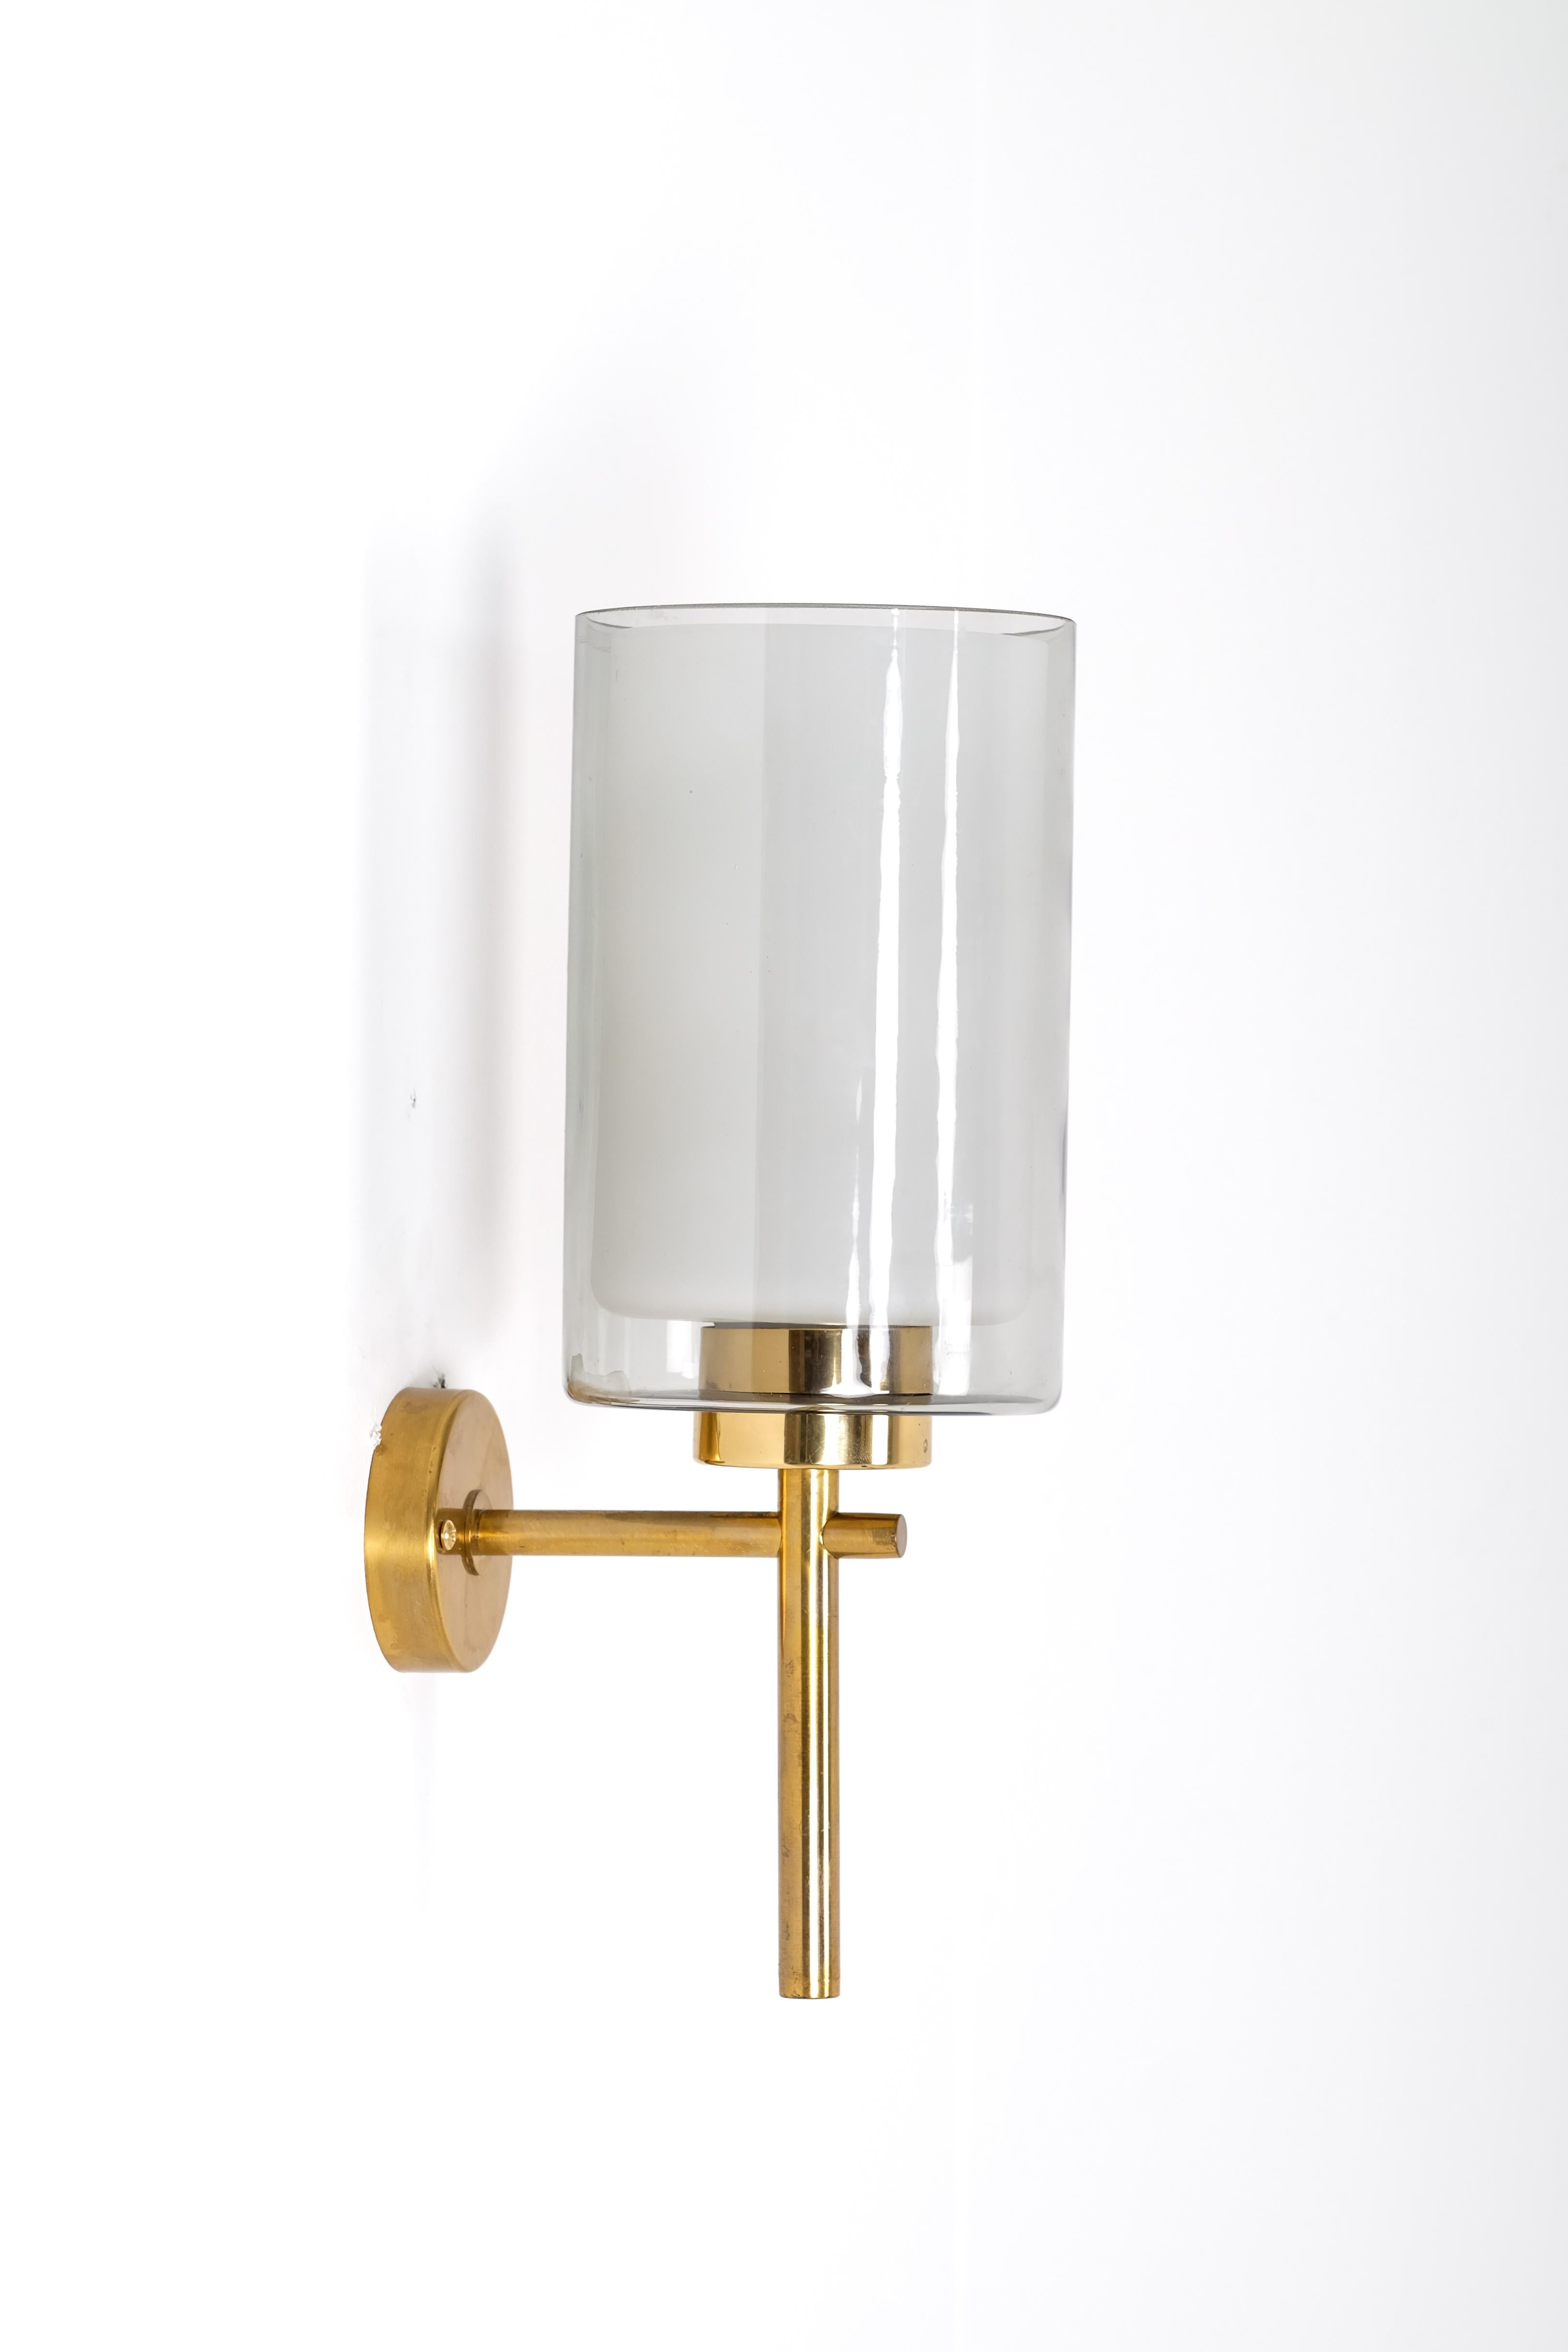 Mid-20th Century Set of 6 Brass & Glass wall lamps, Sweden, 1950s For Sale